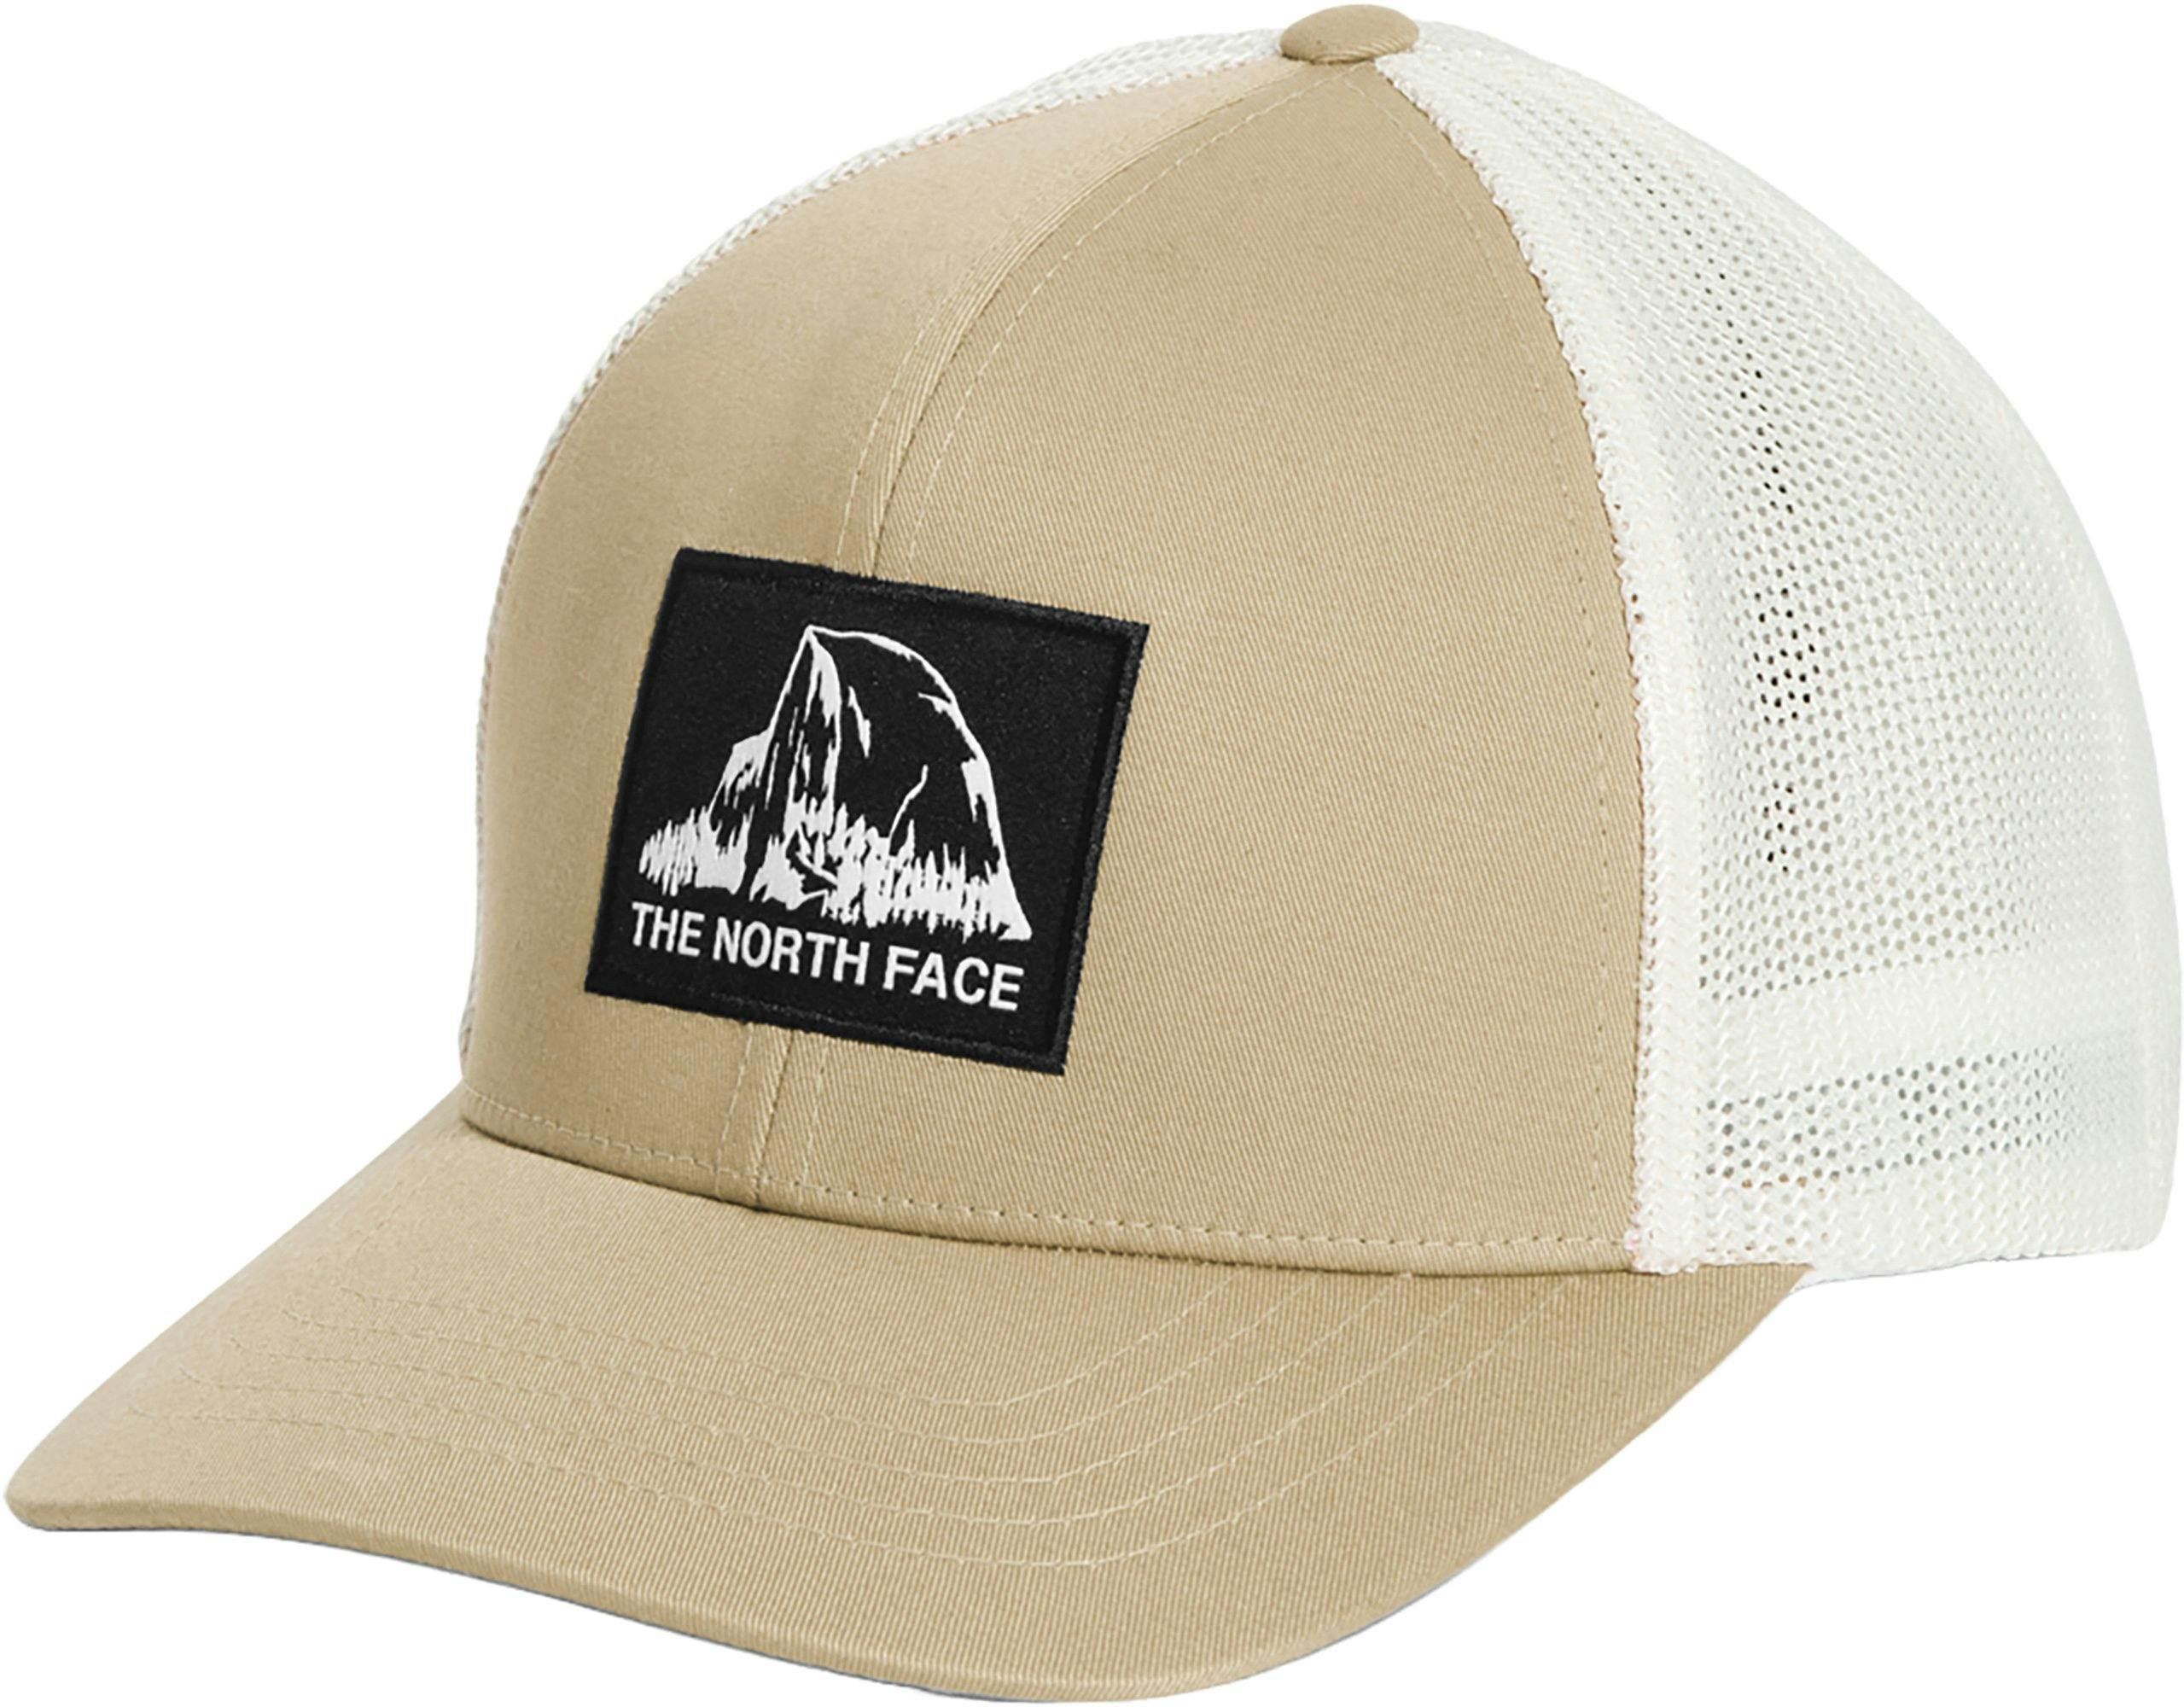 Product image for Truckee Trucker Hat - Unisex